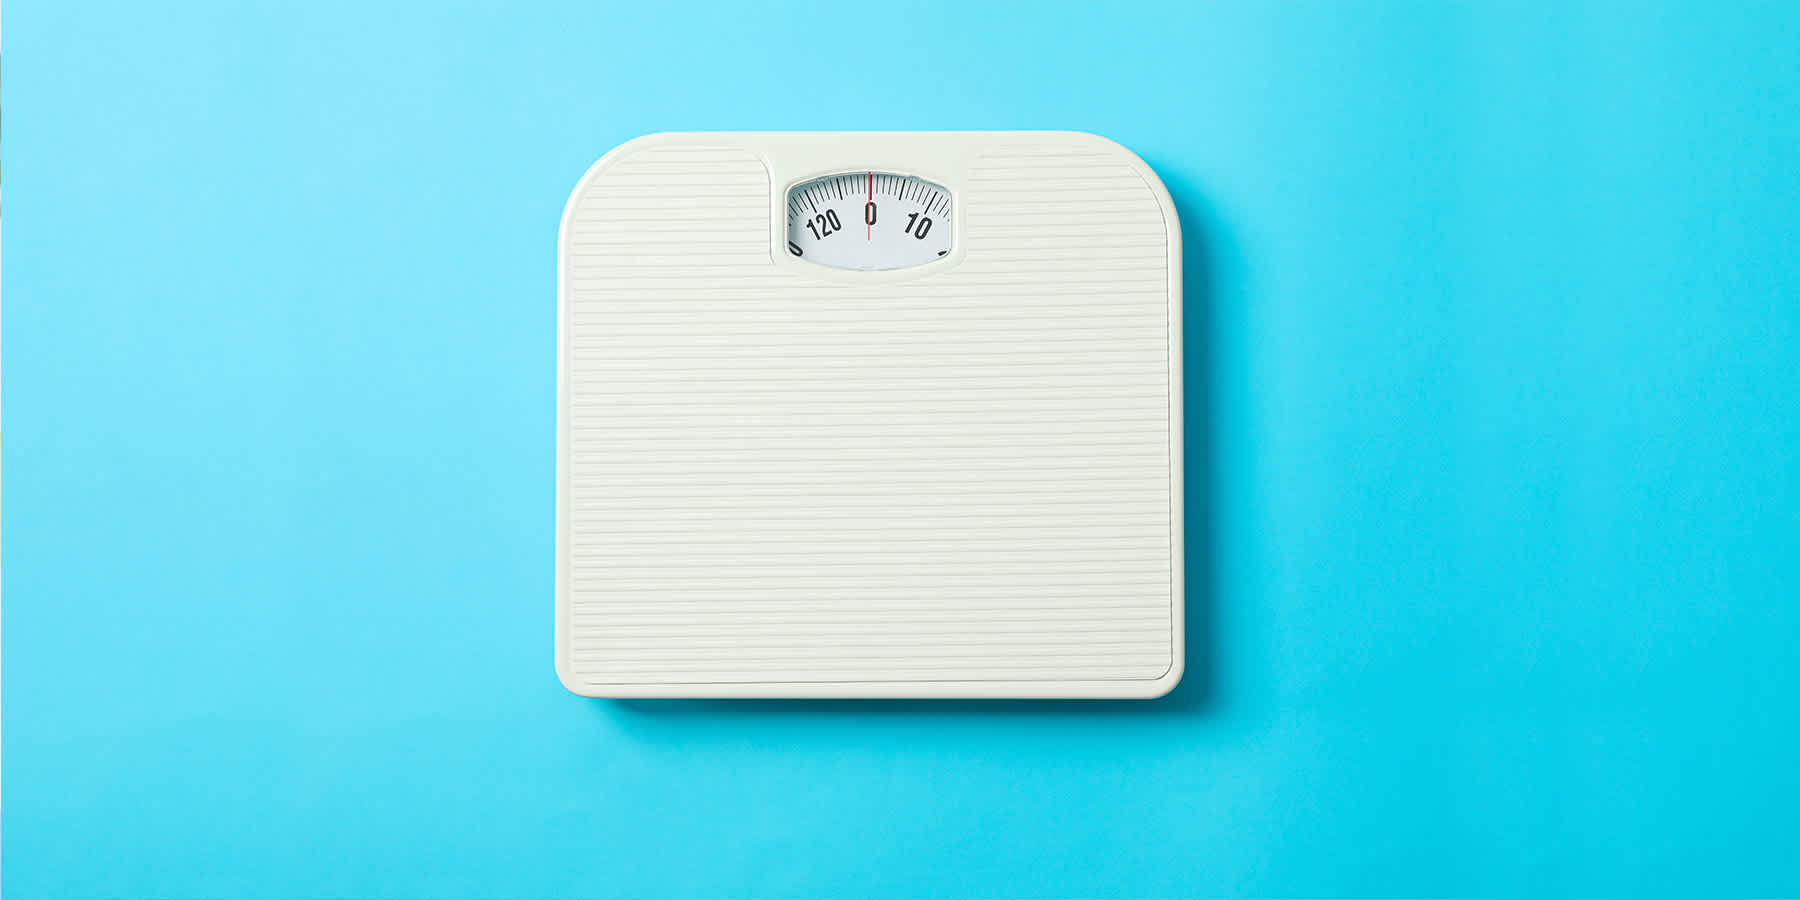 Bathroom scale for measuring weight loss and when to stop a keto diet